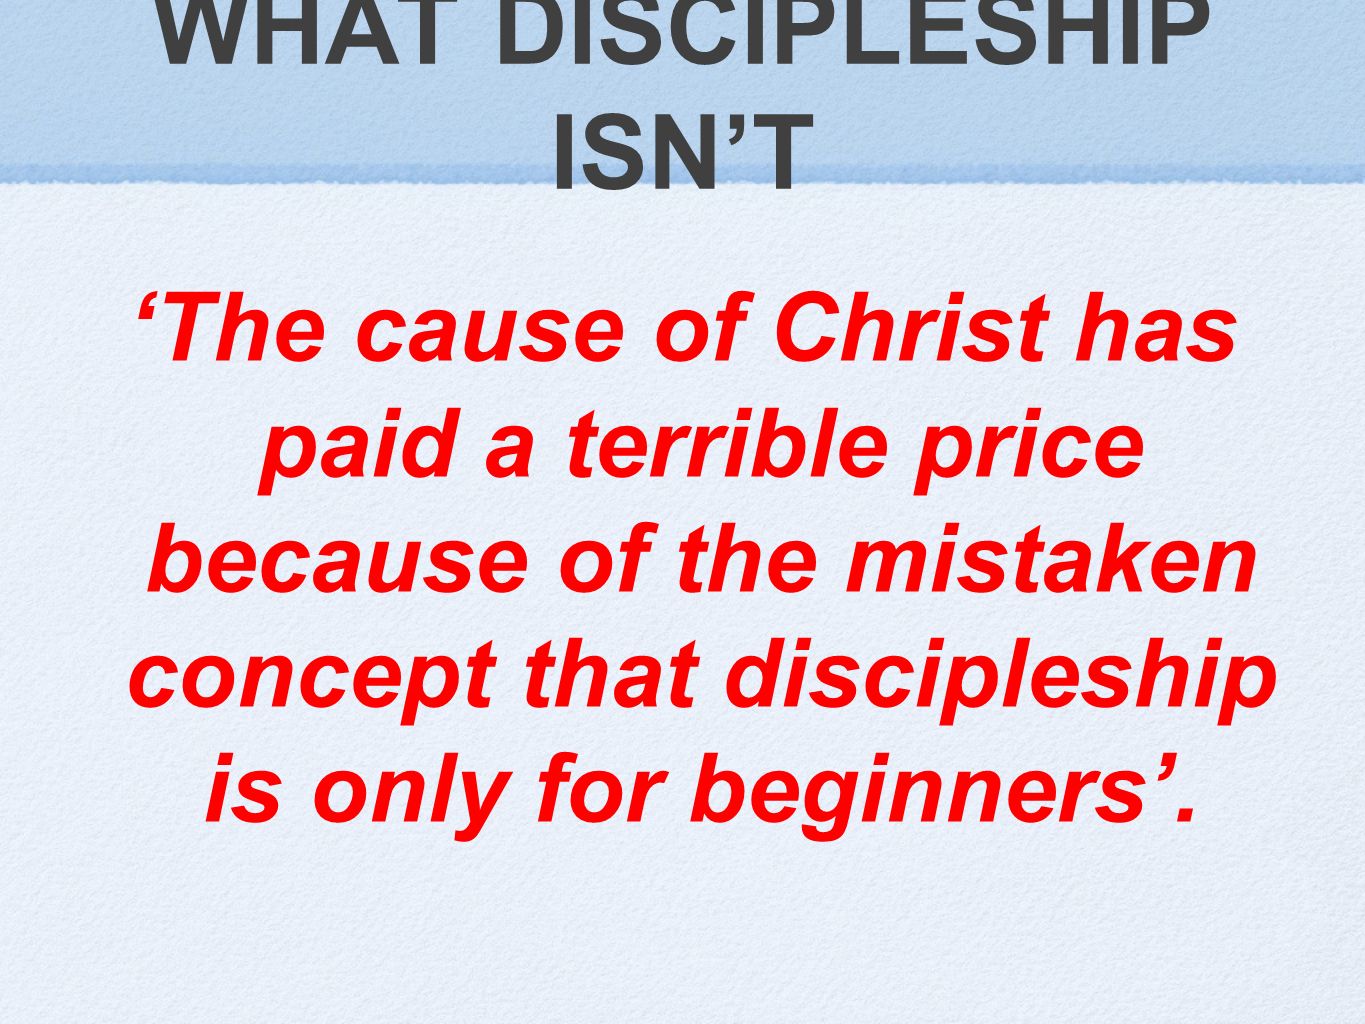 WHAT DISCIPLESHIP ISN’T ‘The cause of Christ has paid a terrible price because of the mistaken concept that discipleship is only for beginners’.